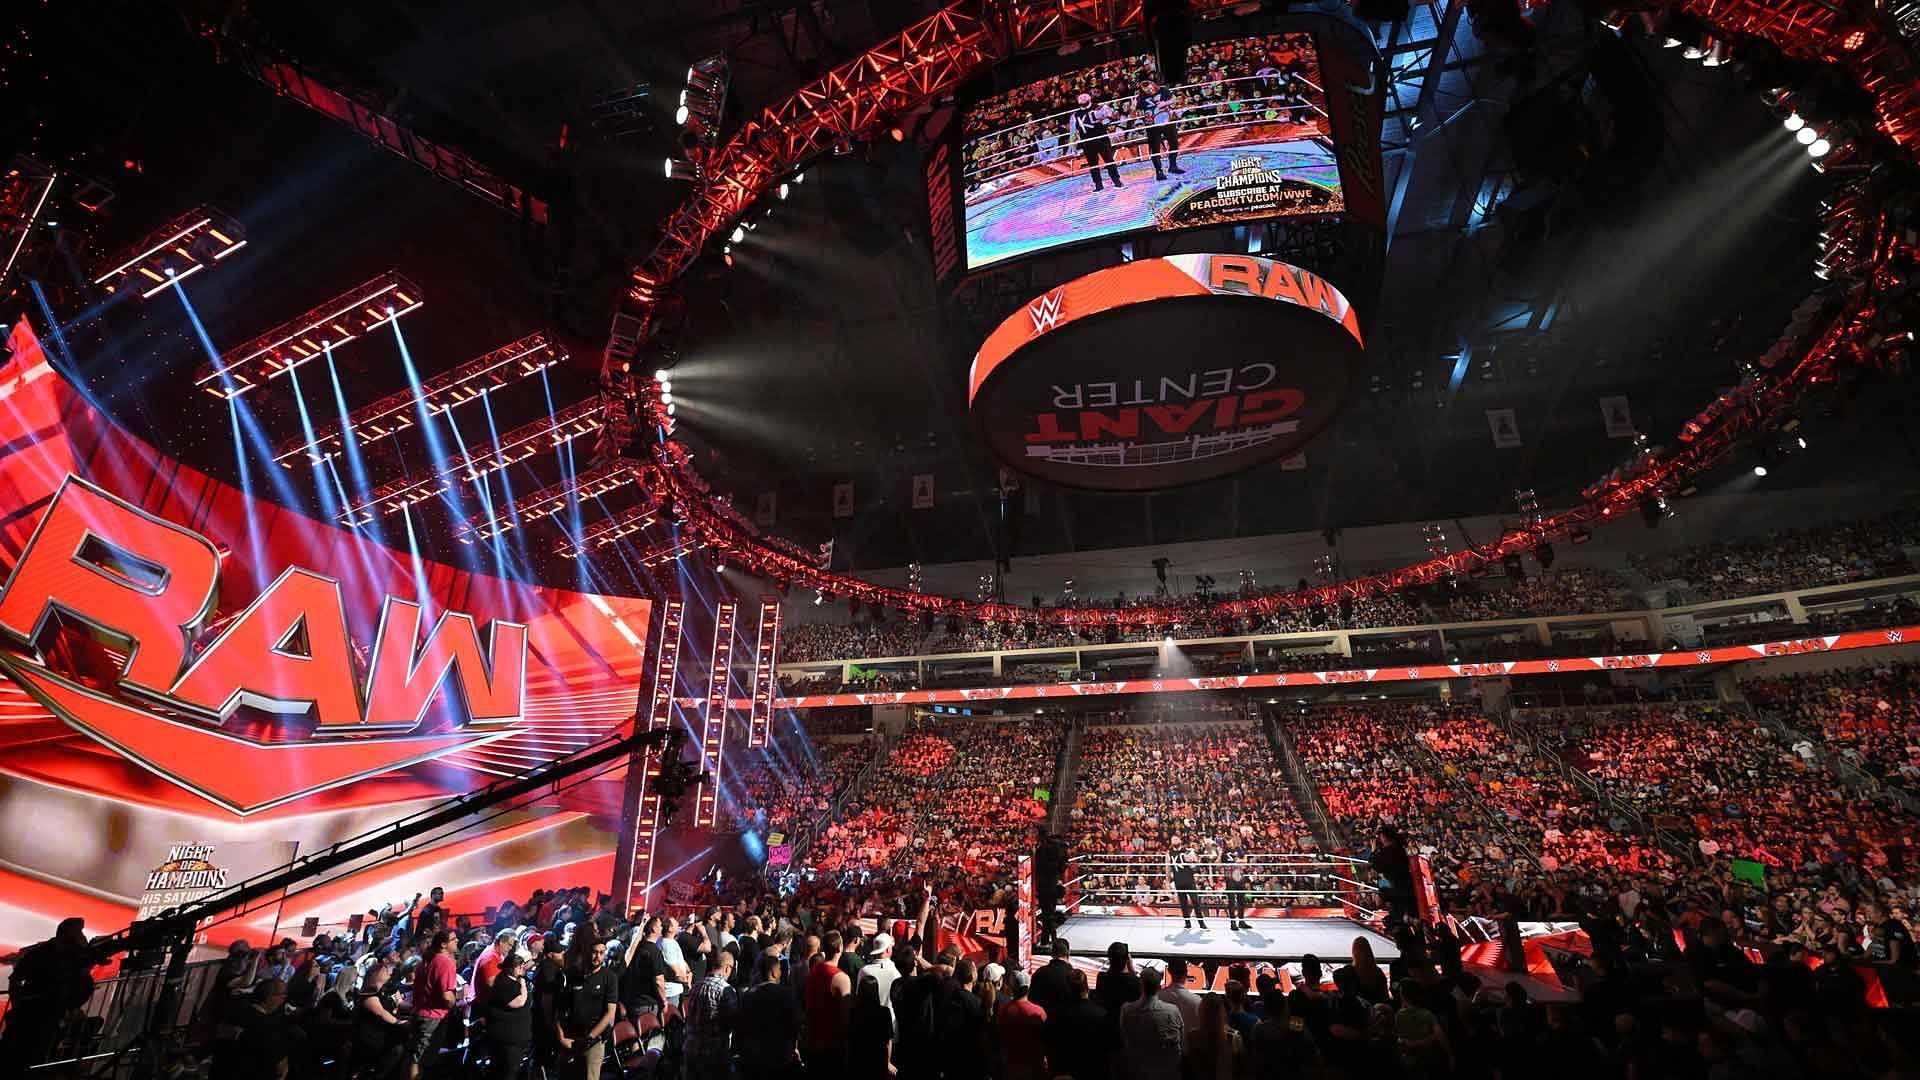 The WWE RAW ring, stage and set with a packed crowd